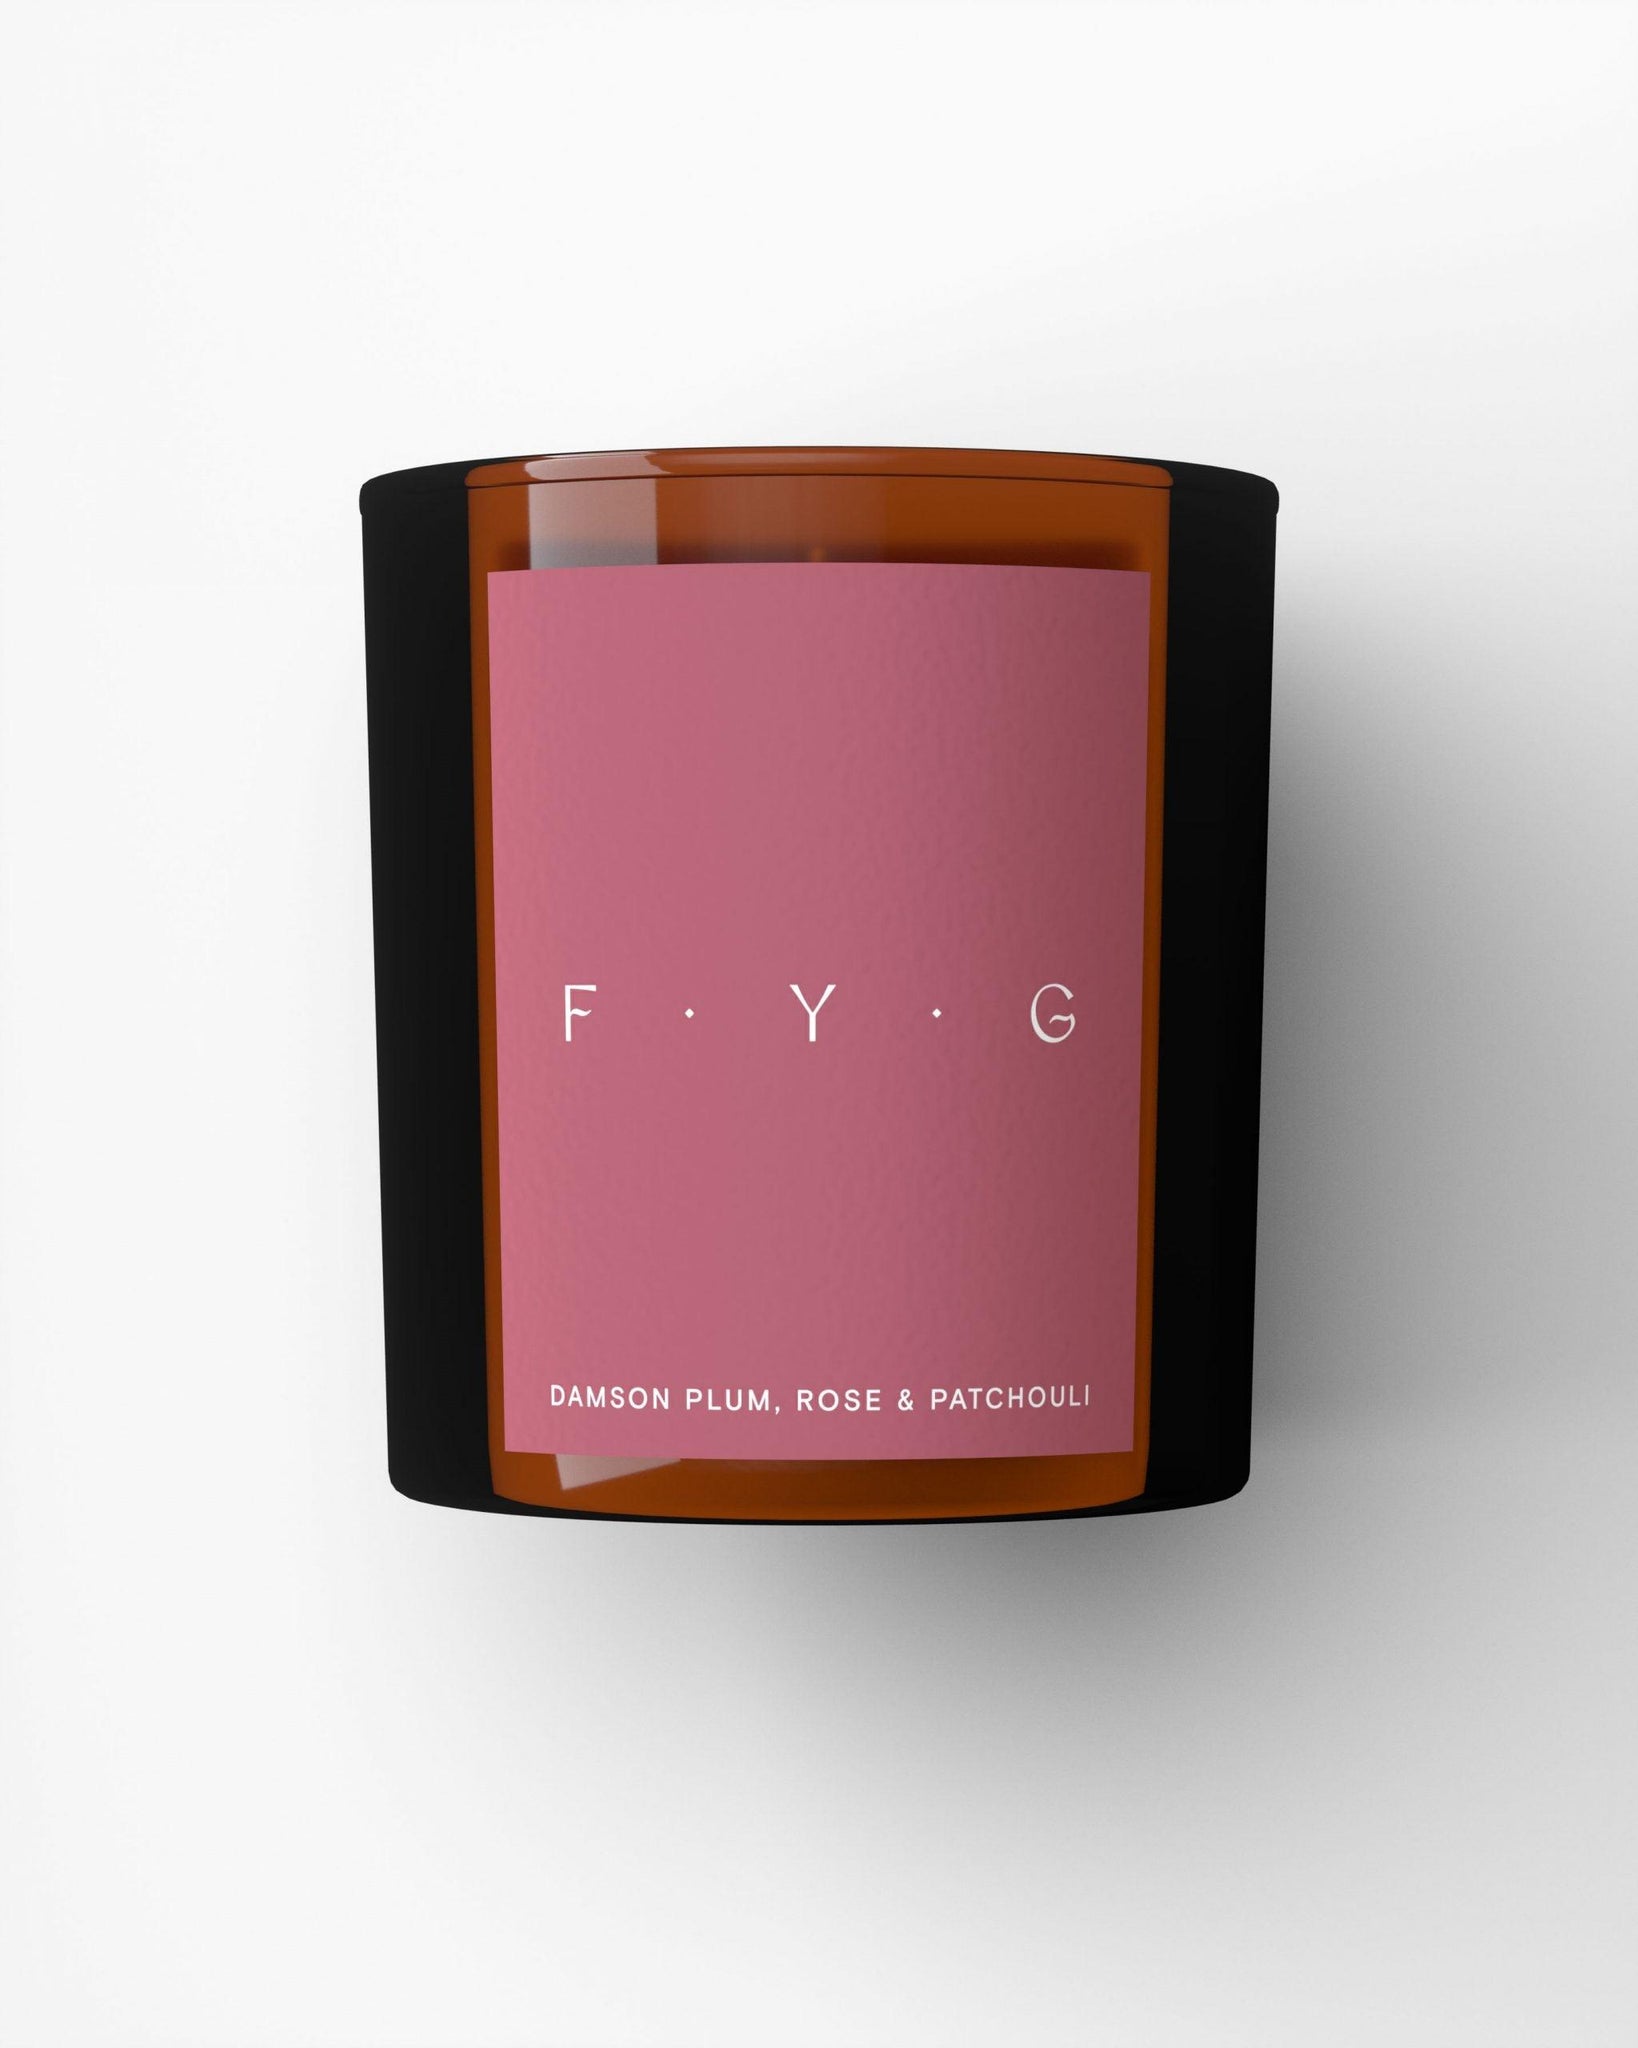 F.Y.G Candle Damson Plum, Rose & Patchouli - MADE THE EDIT